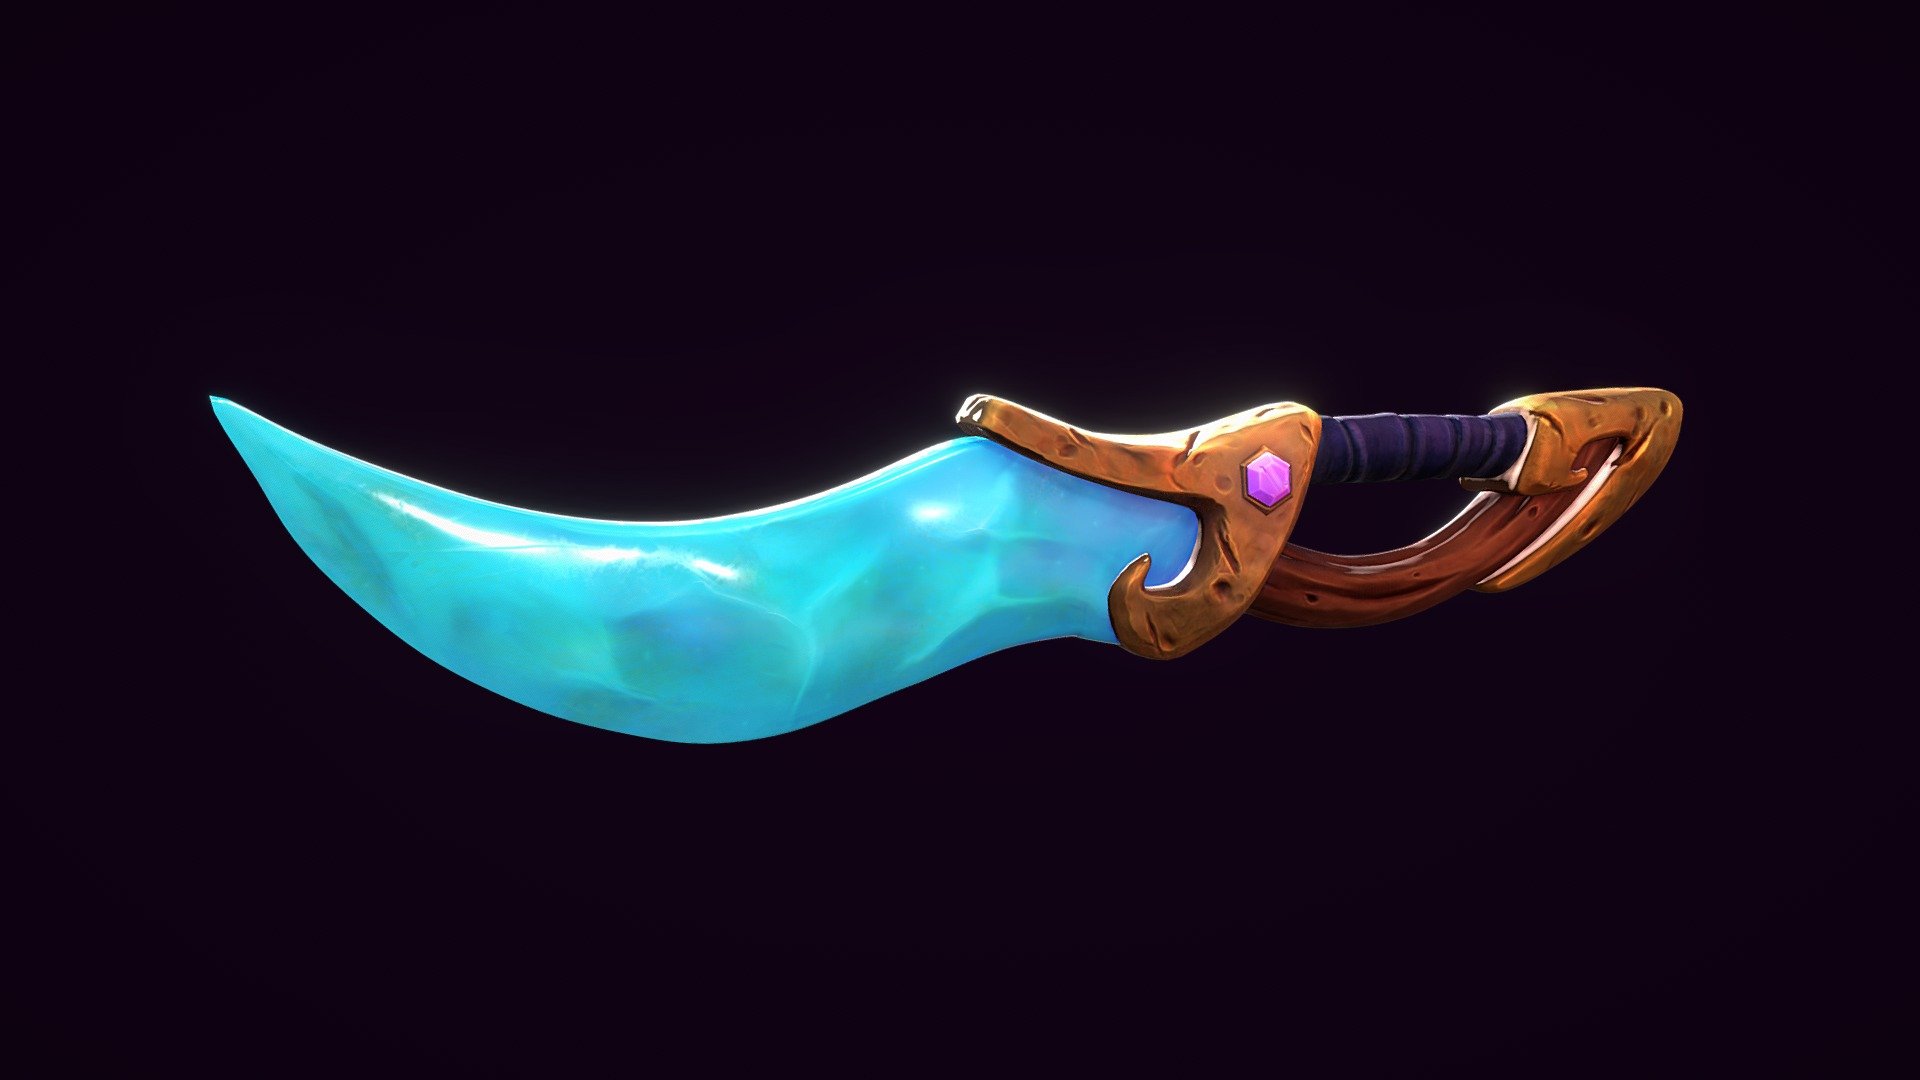 I wanted to design and create a fantasy knife from scratch, so here we are :)
Here's my blog post on the process if you like: https://www.artstation.com/enalya/blog/eqvL/arctic-glass-knife

The ZIP-file includes all textures and a .blend with one lower subdivision and full lighting setup 3d model